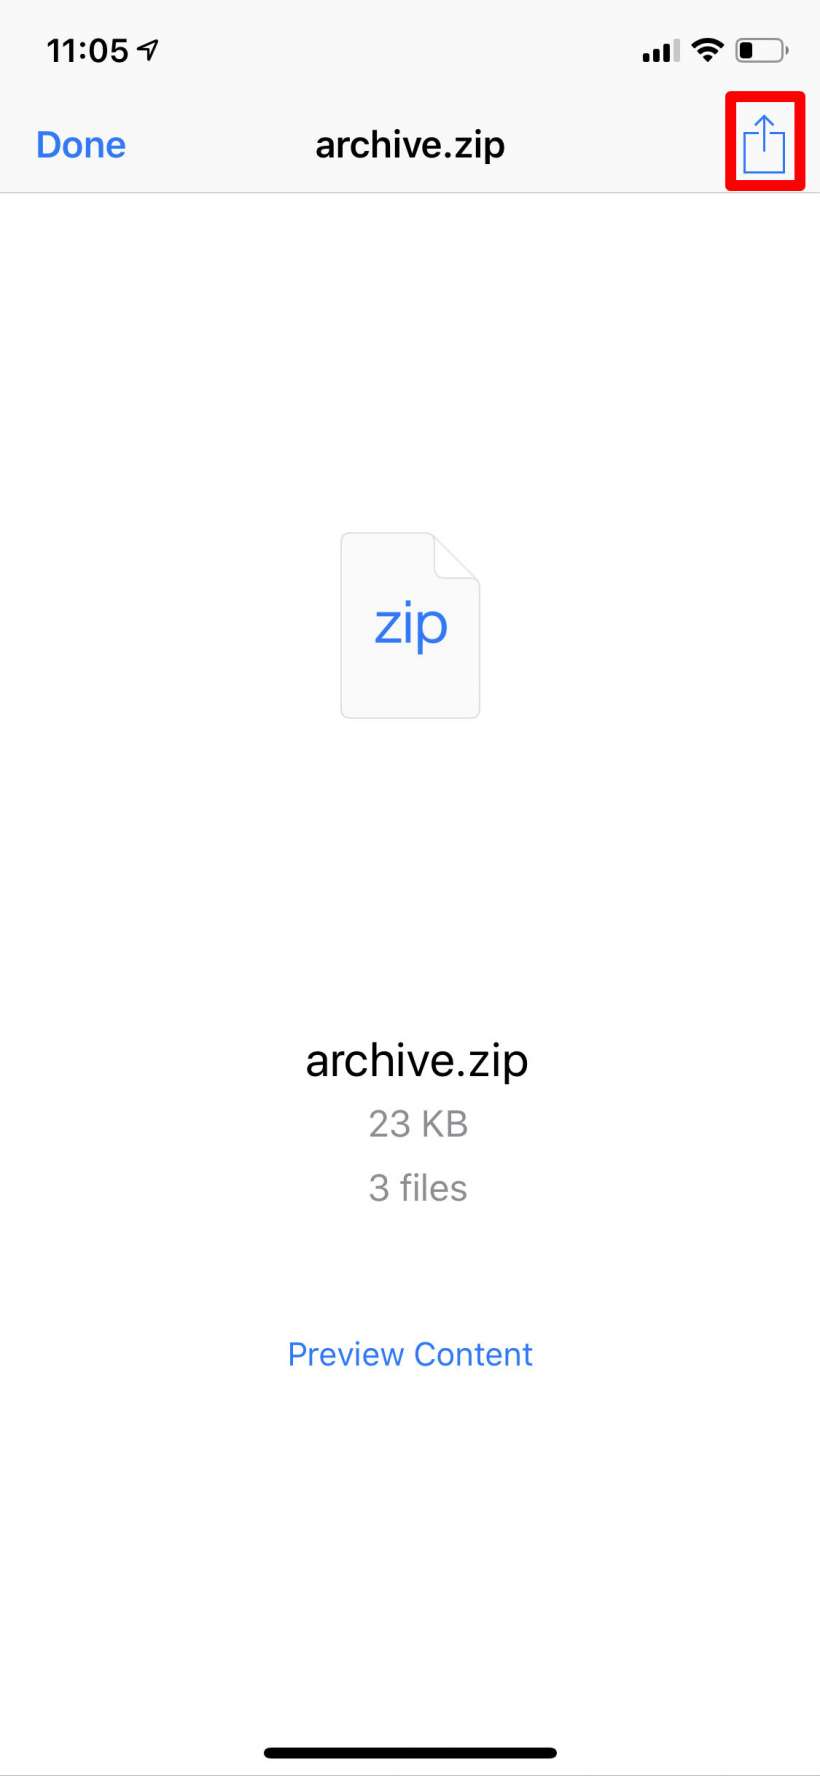 how to extract a zip file on iphone